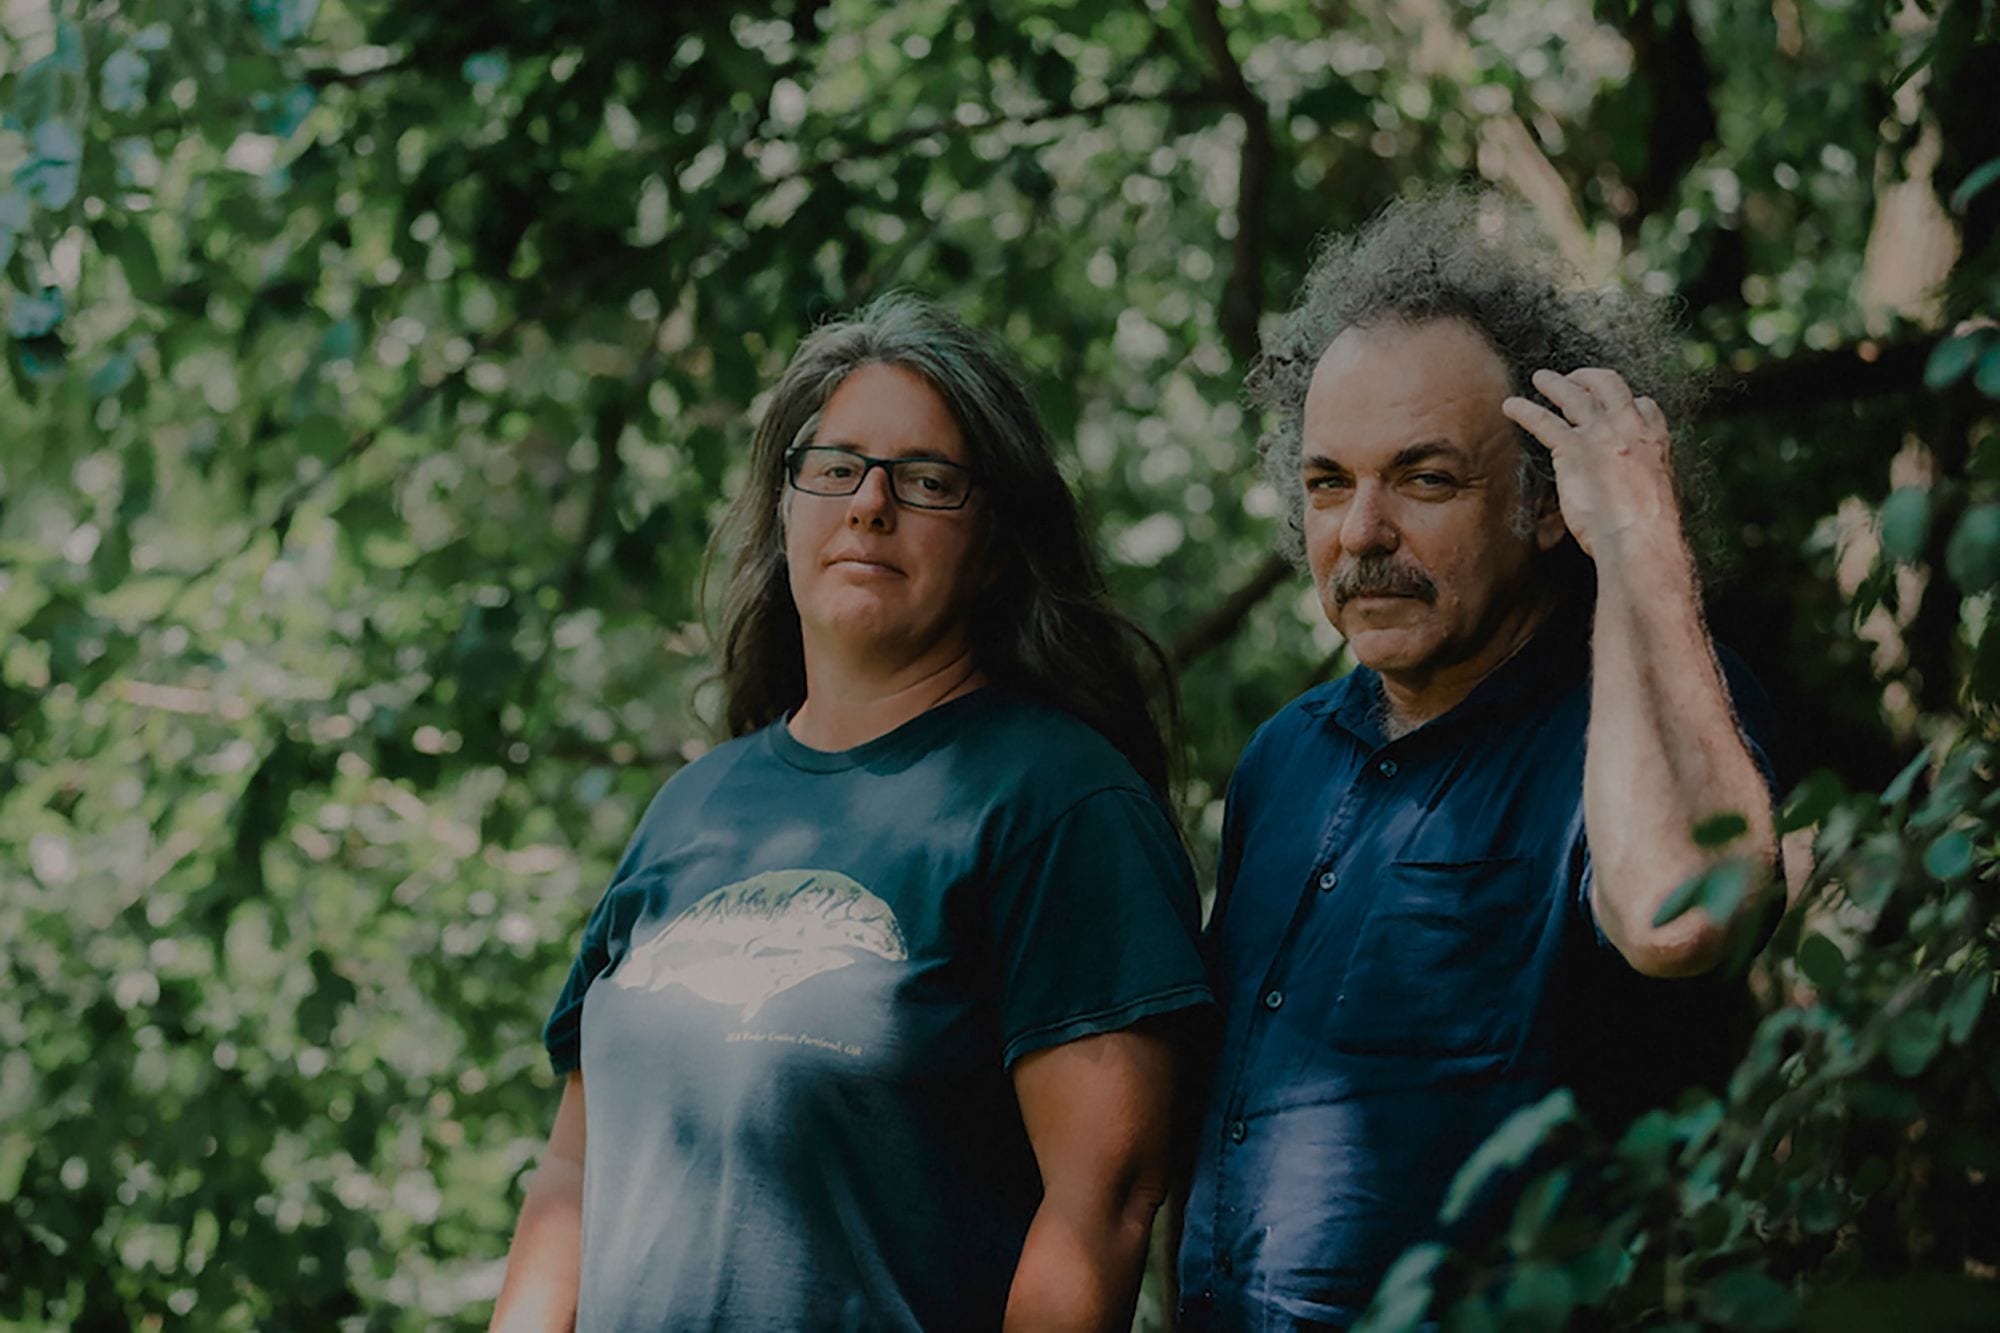 Jim White and Marisa Anderson’s ‘The Quickening’ Takes an Experimental Journey